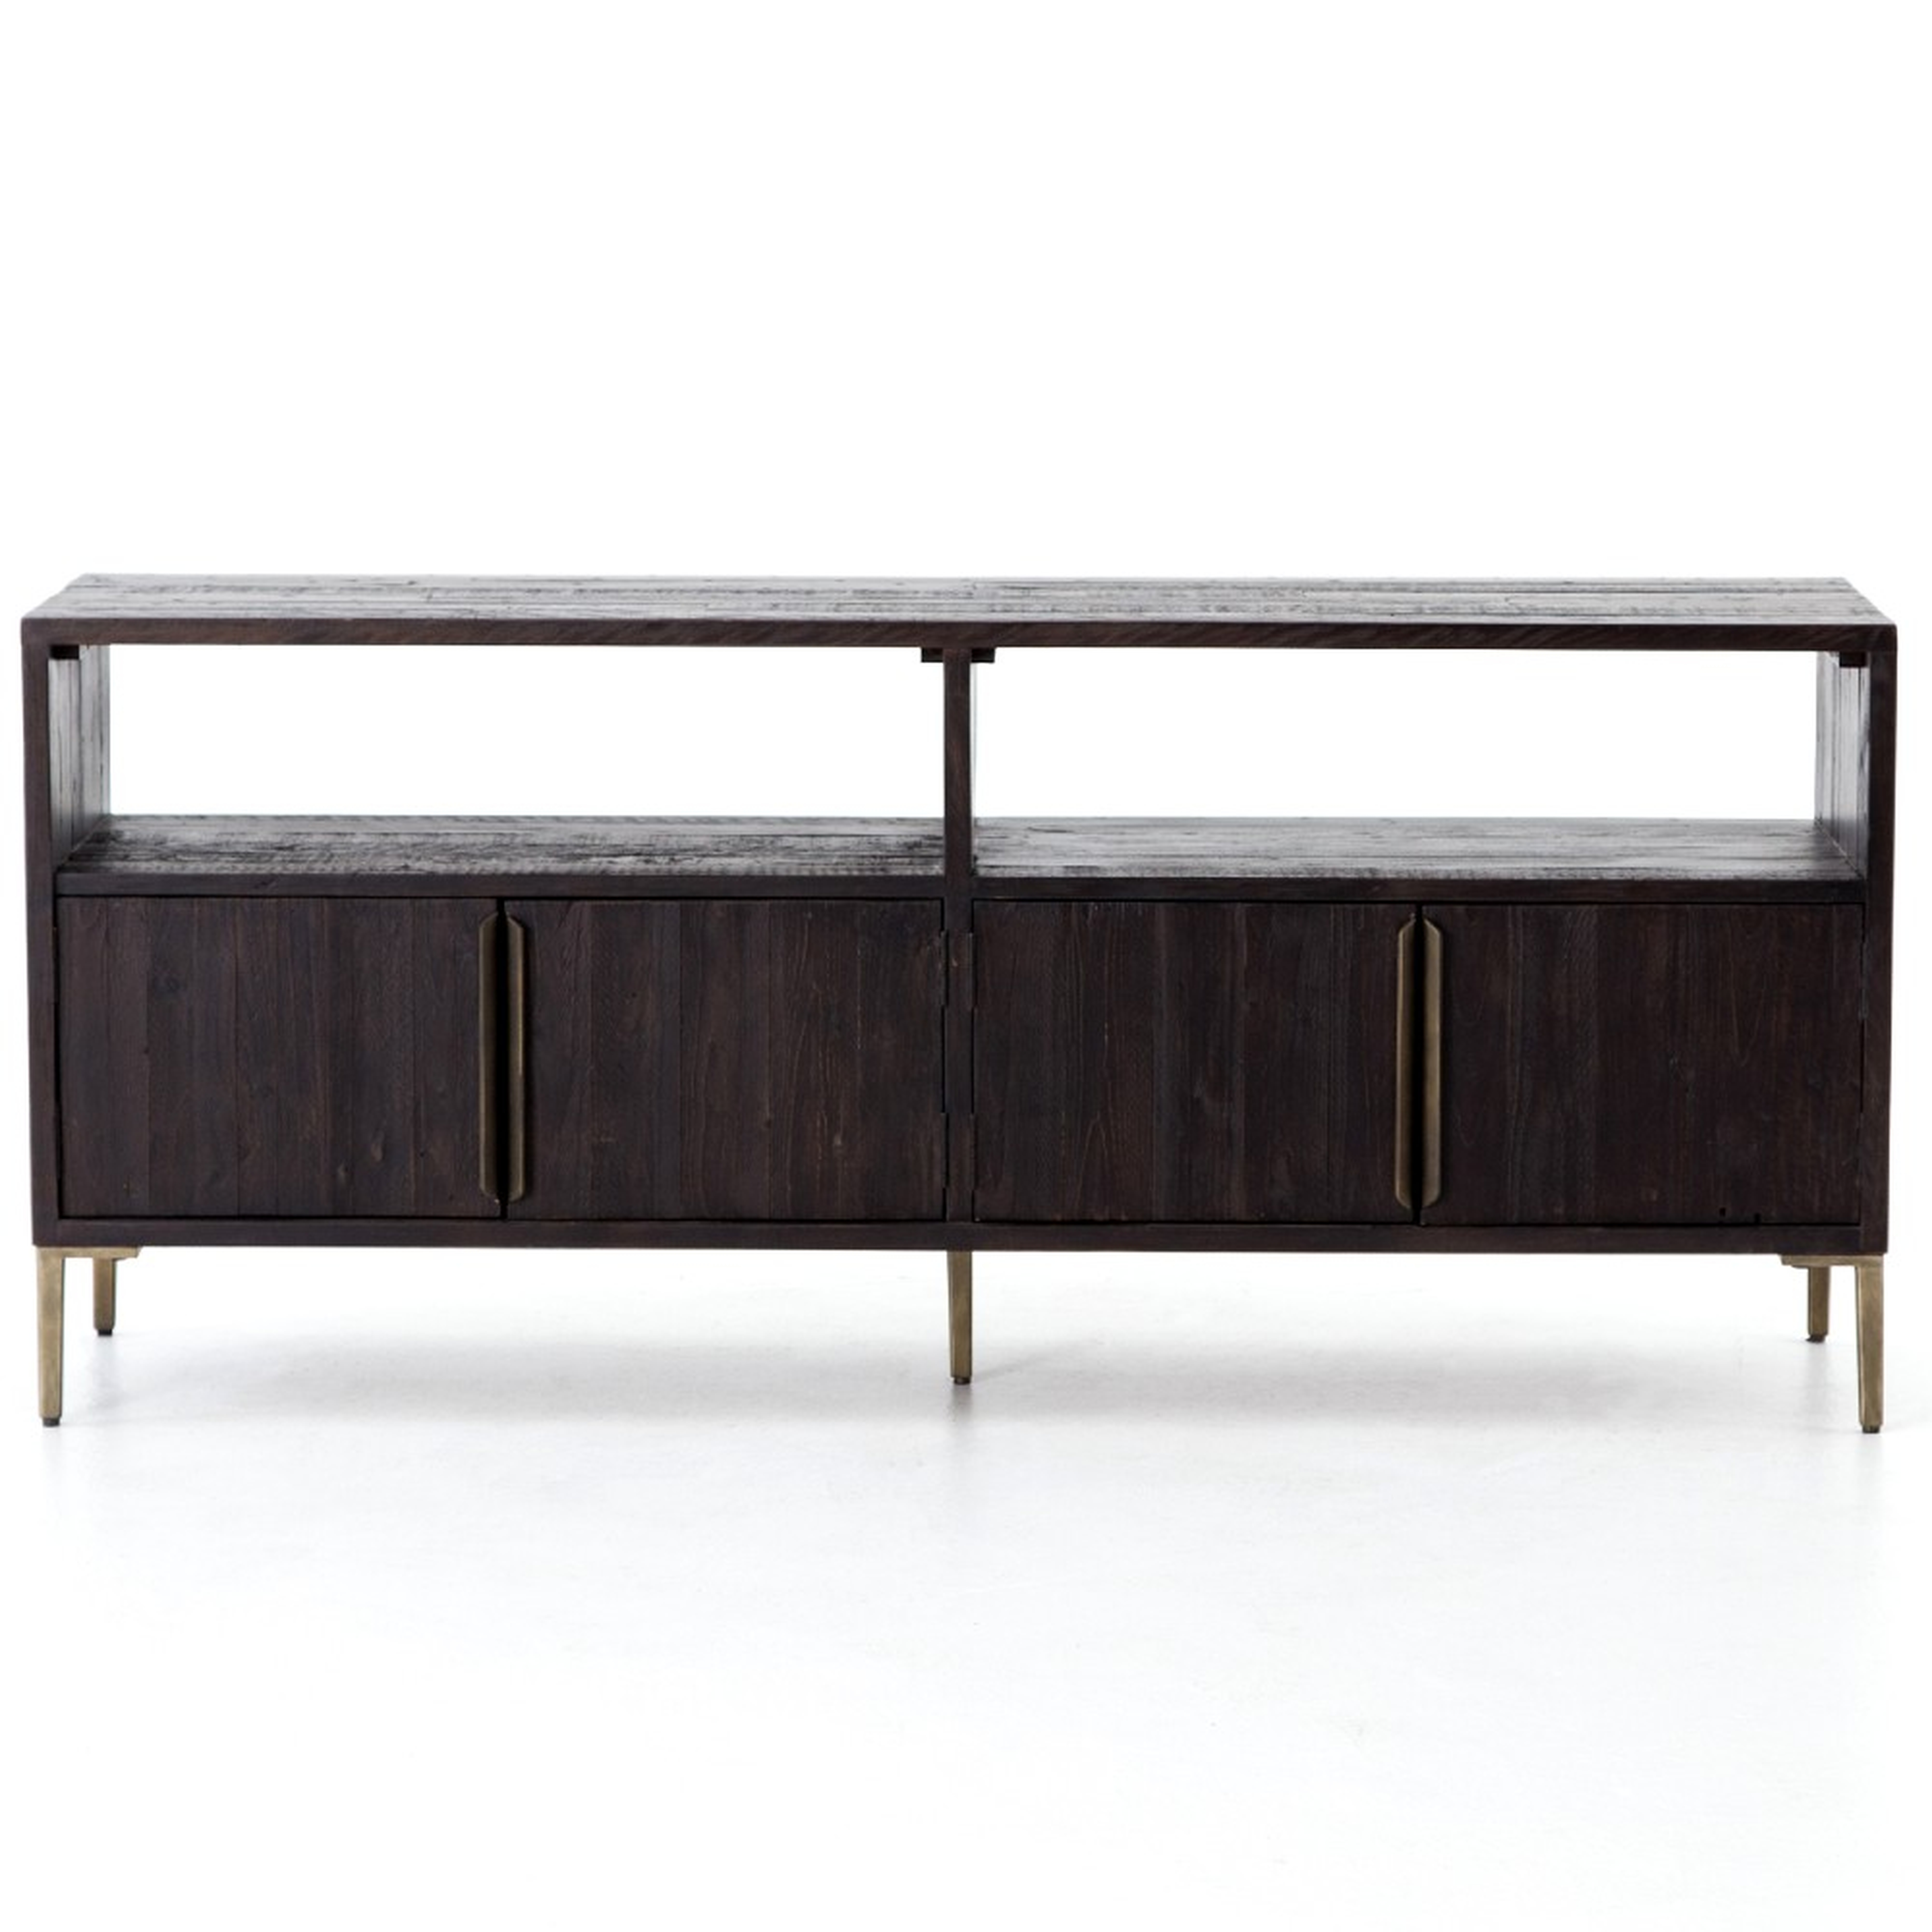 Yvette Rustic Lodge Black Pine Wood Gold Iron Media Console - Kathy Kuo Home